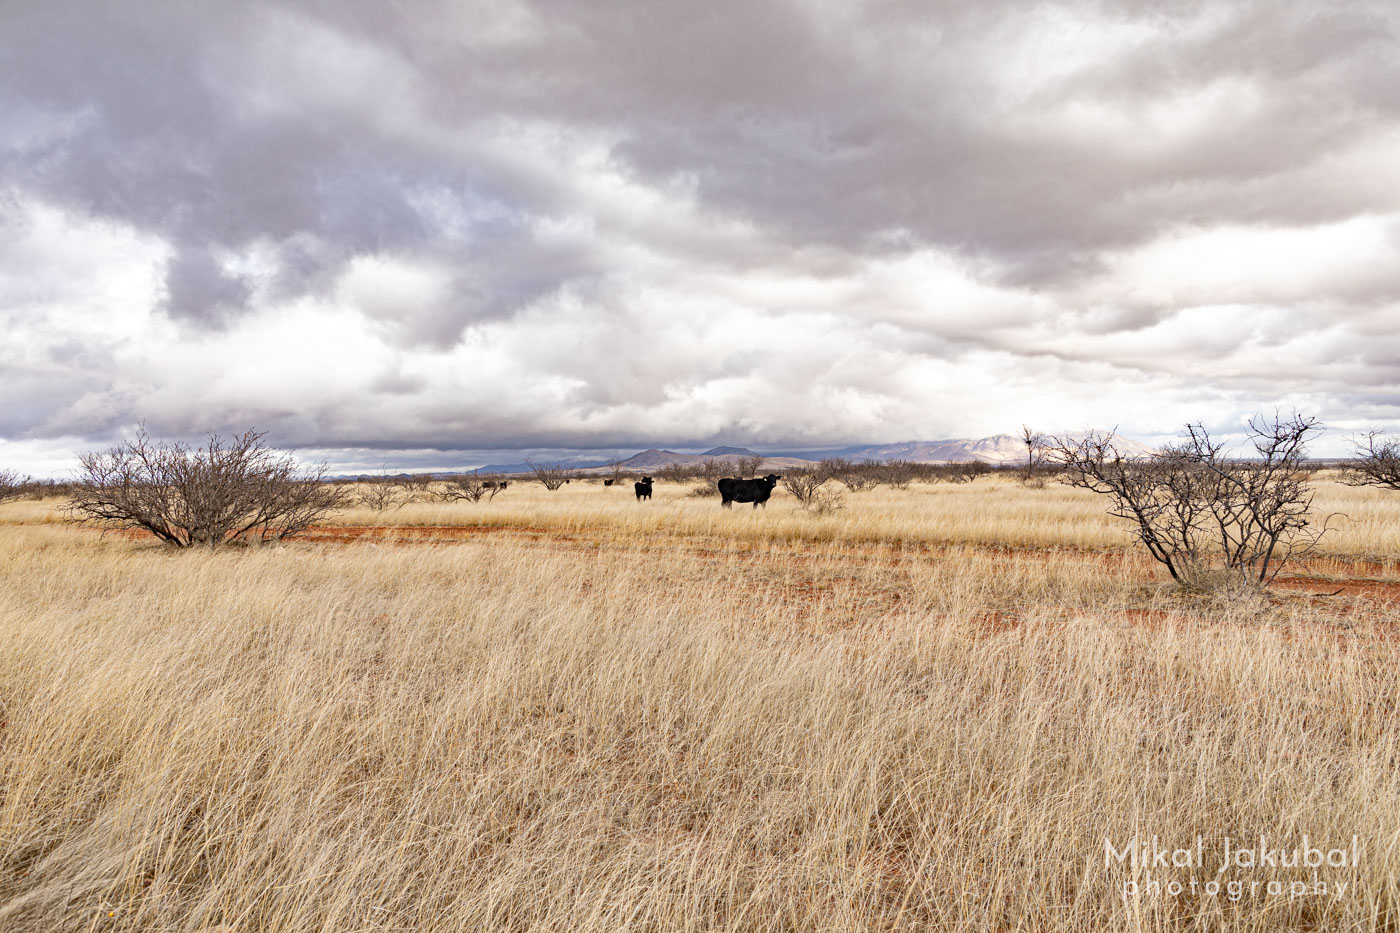 A wide view of dry grasslands with scattered, leafless mesquite bushes under cloudy skies. A few black cattle graze in the distance, with low brown mountains on the far horizon.